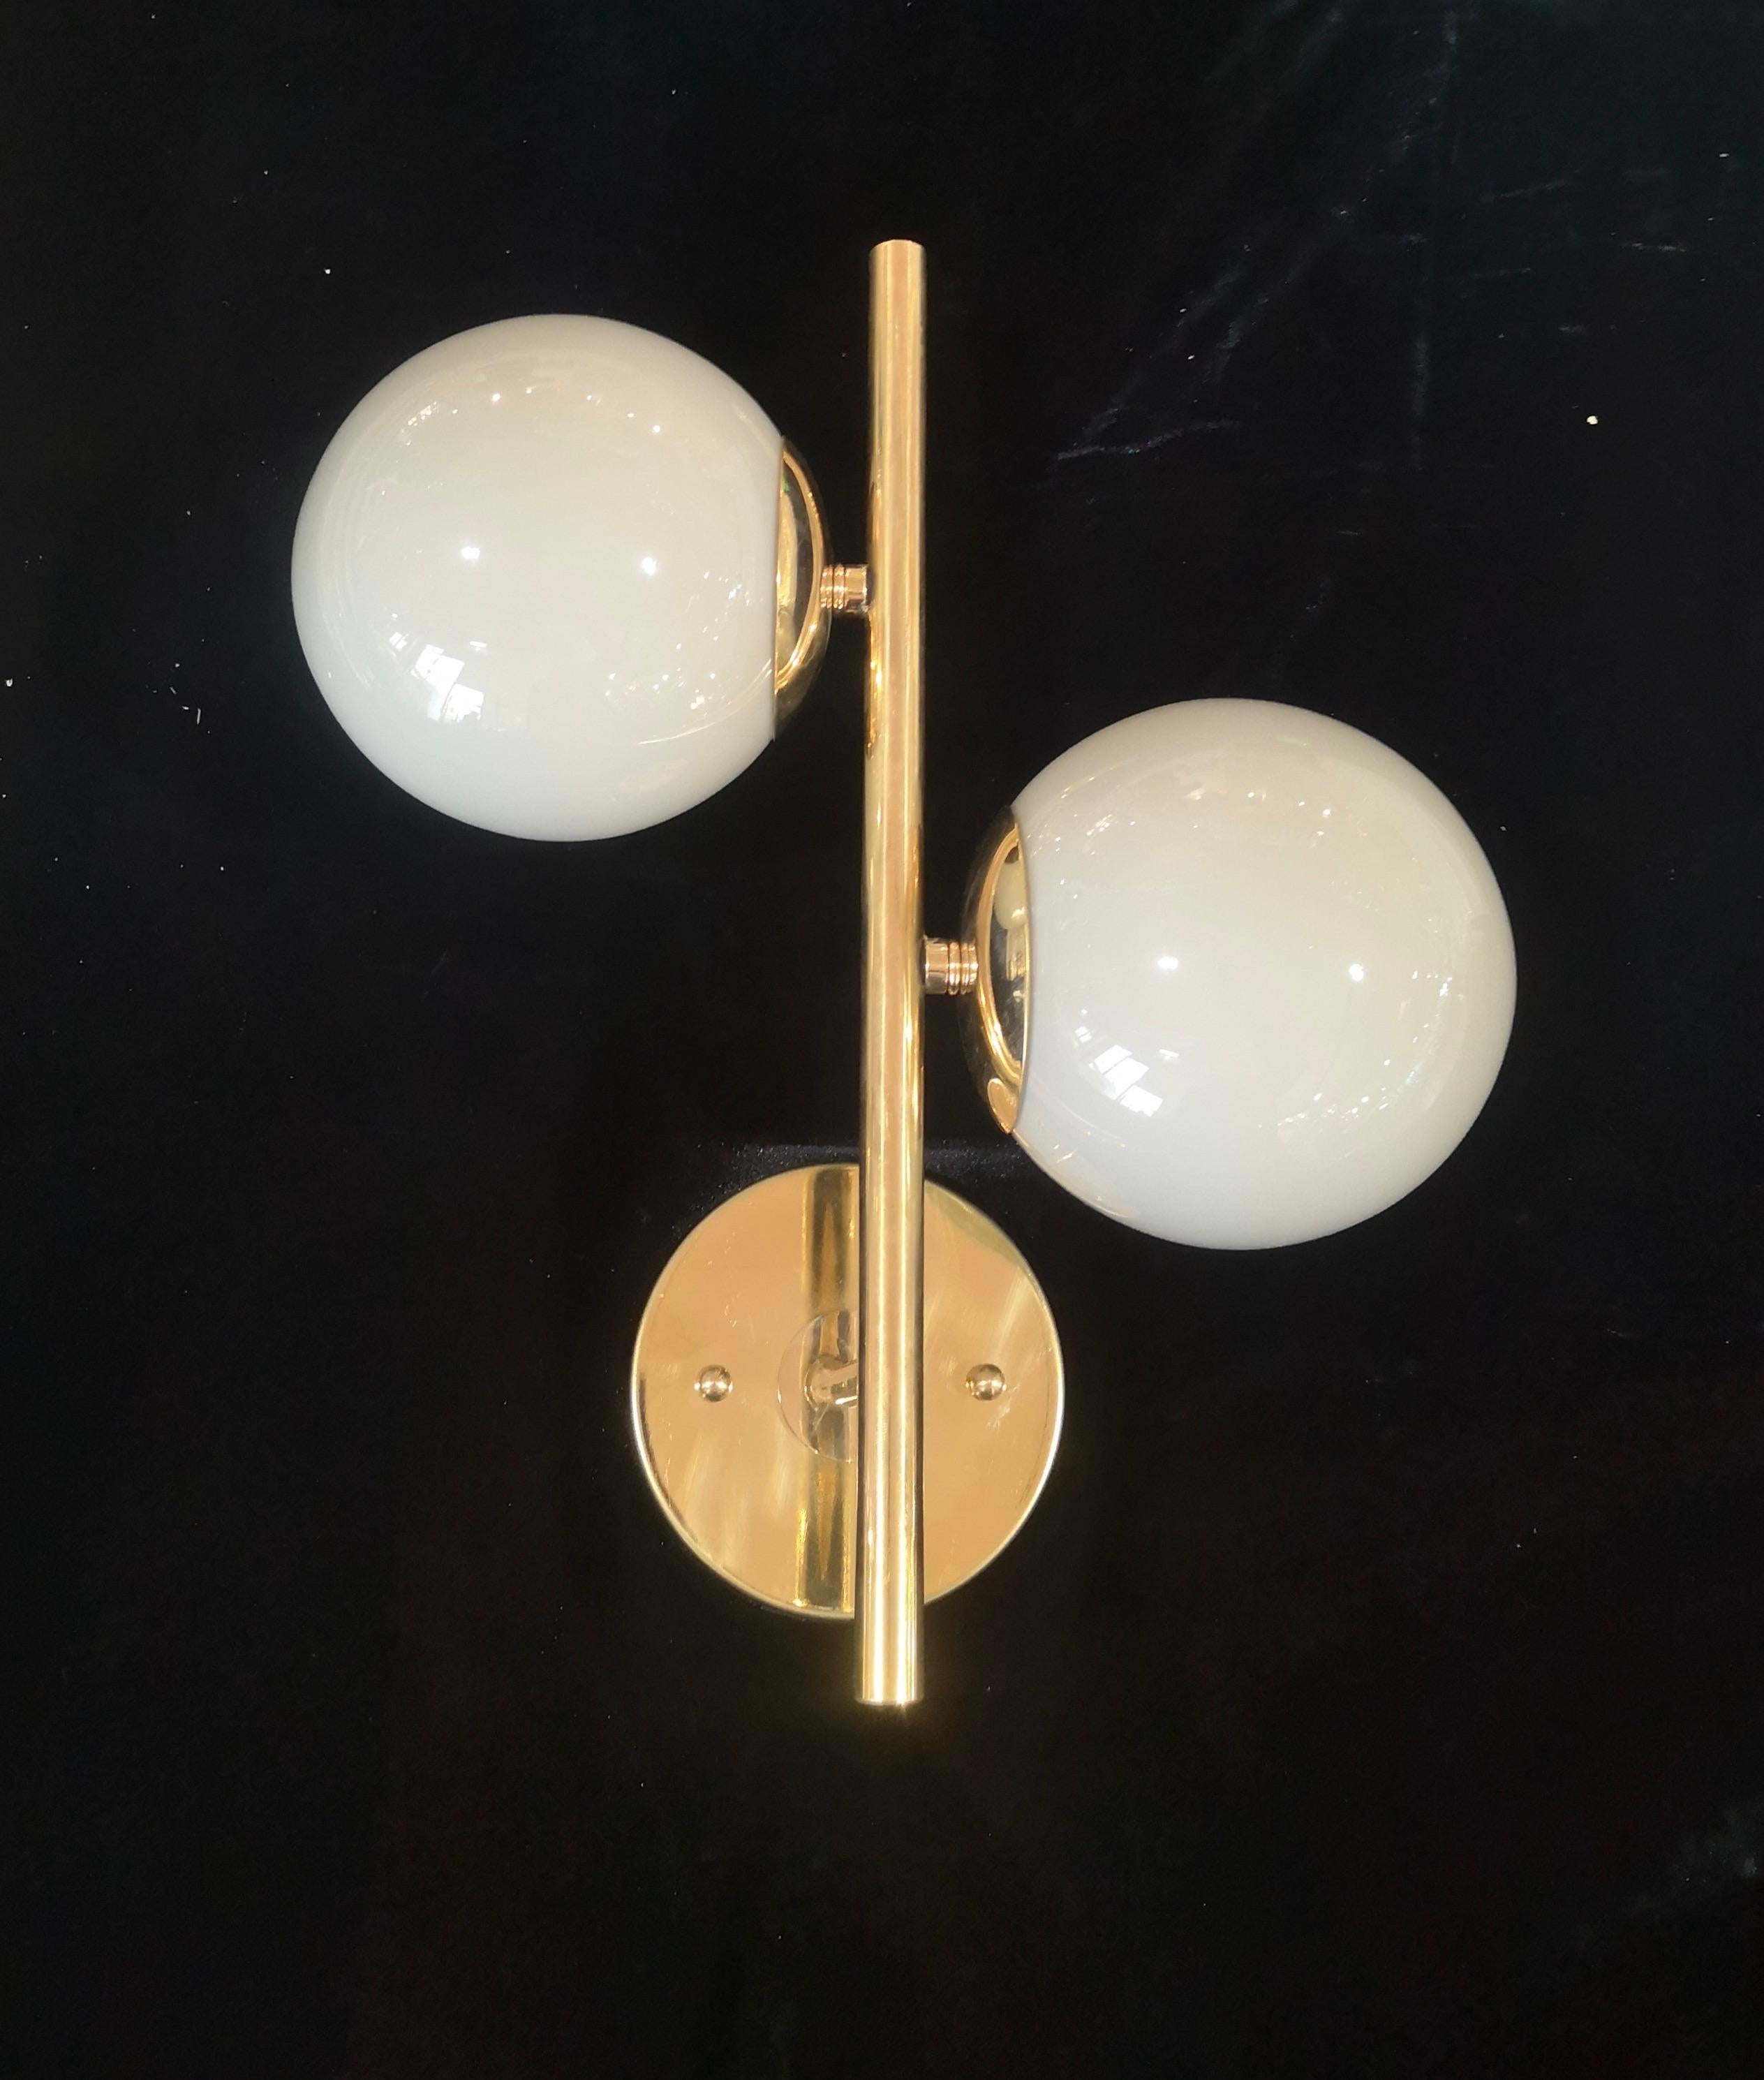 Refined and delicate design for this wall light with white color Murano glass.

The applique are made up of a brass structure that allows the housing of a beautiful white color Murano glass sphere. The design is very clean and simple, but at the